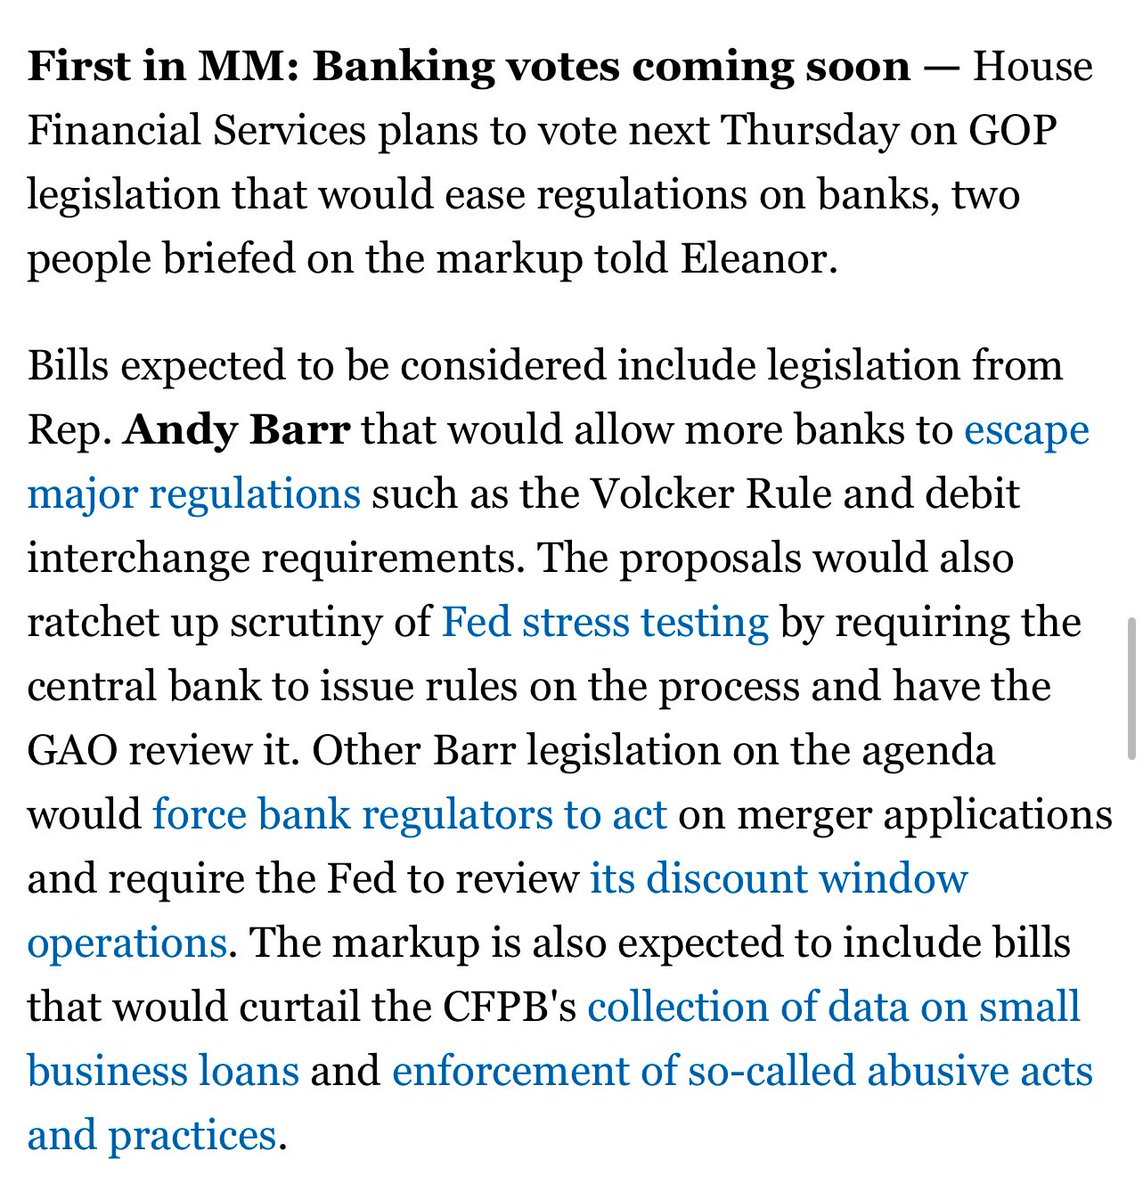 NEW: House Financial Services is slated to vote next Thursday on a host of bills that would ease regulations on a wide swath of banks, I’m told. Some were introduced as recently as this week. More in today’s Morning Money: politico.com/newsletters/mo…